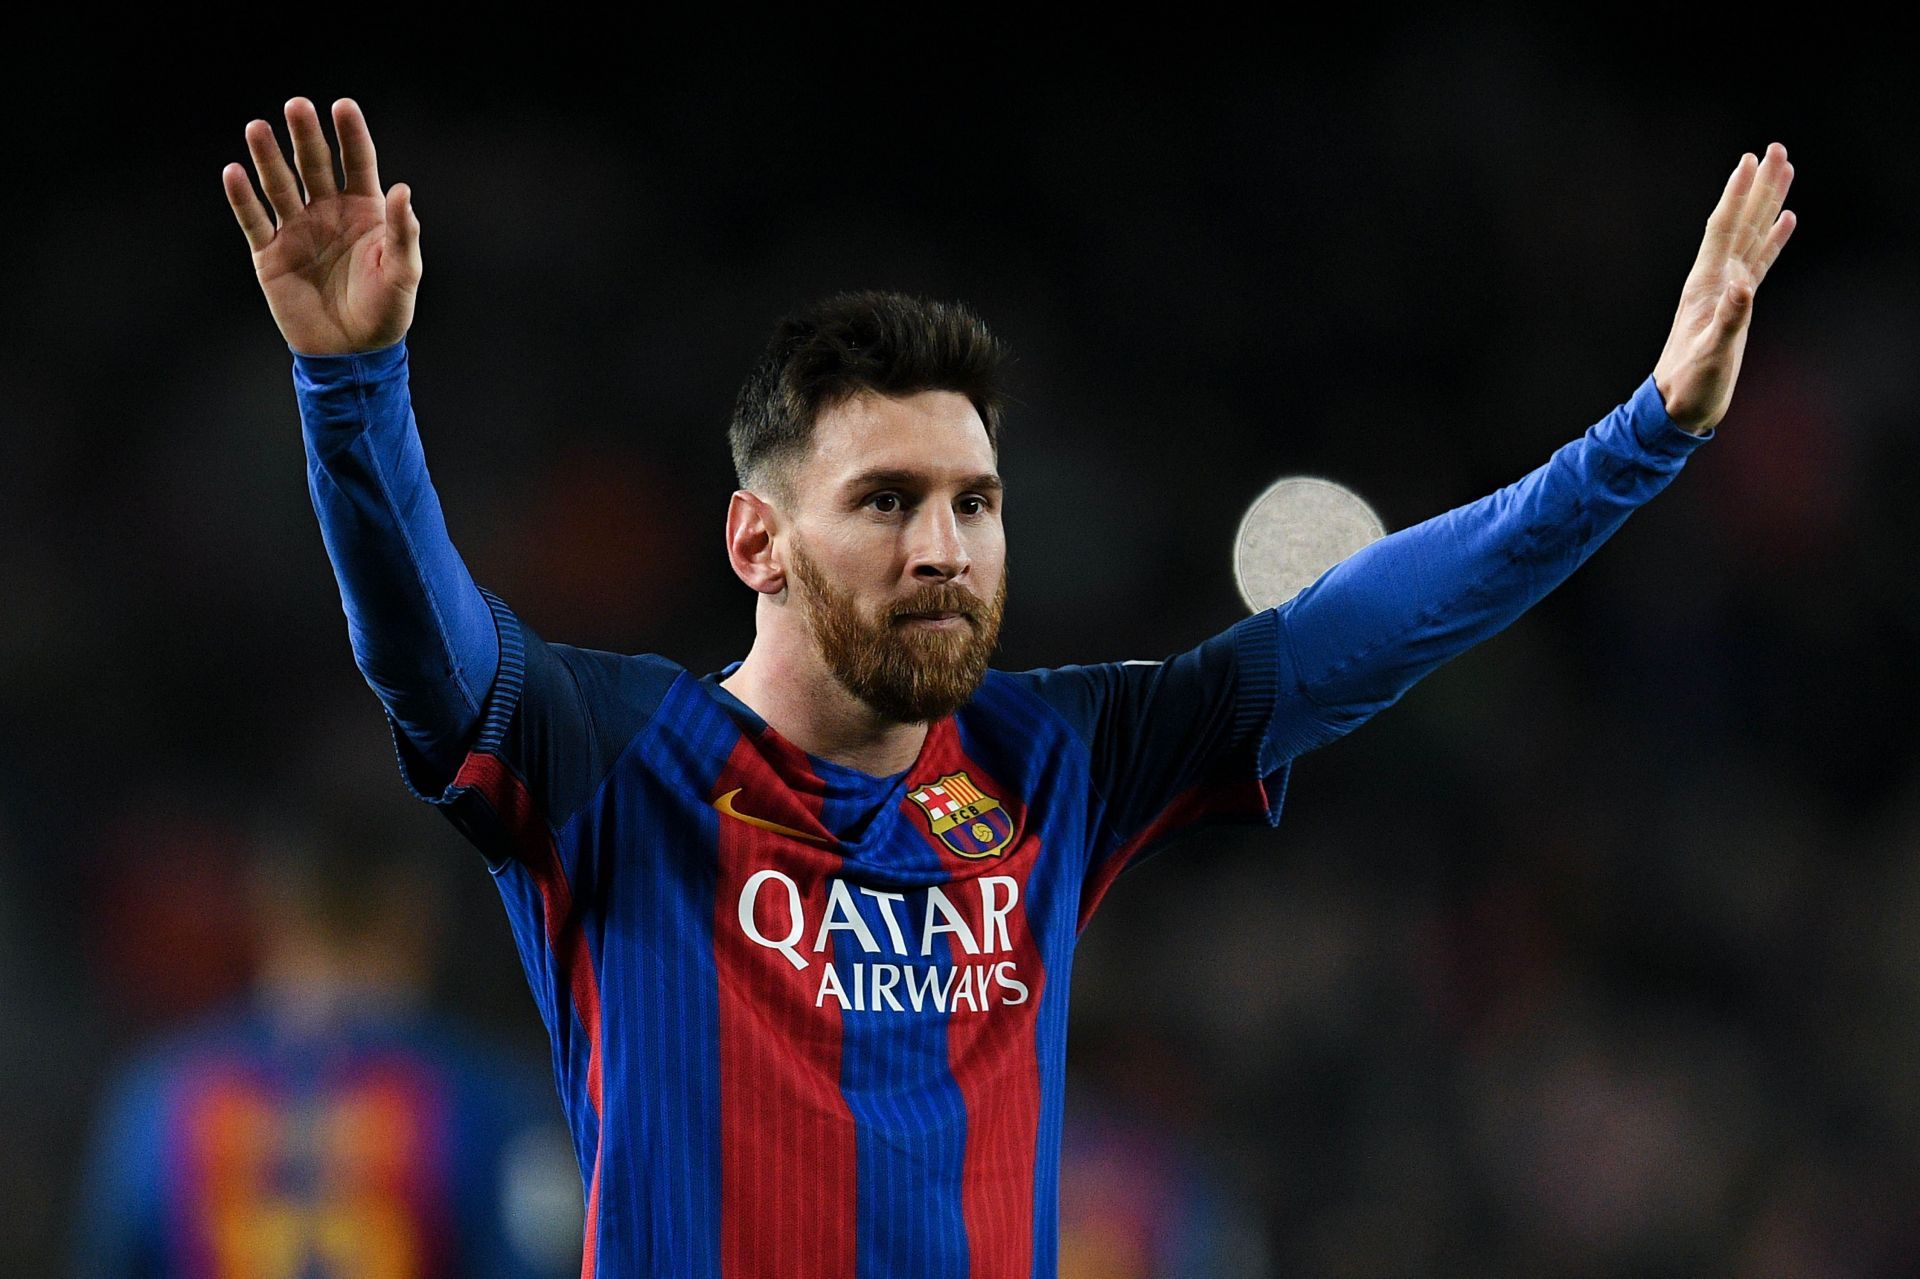 Lionel Messi had a goal-rich year in 2016.